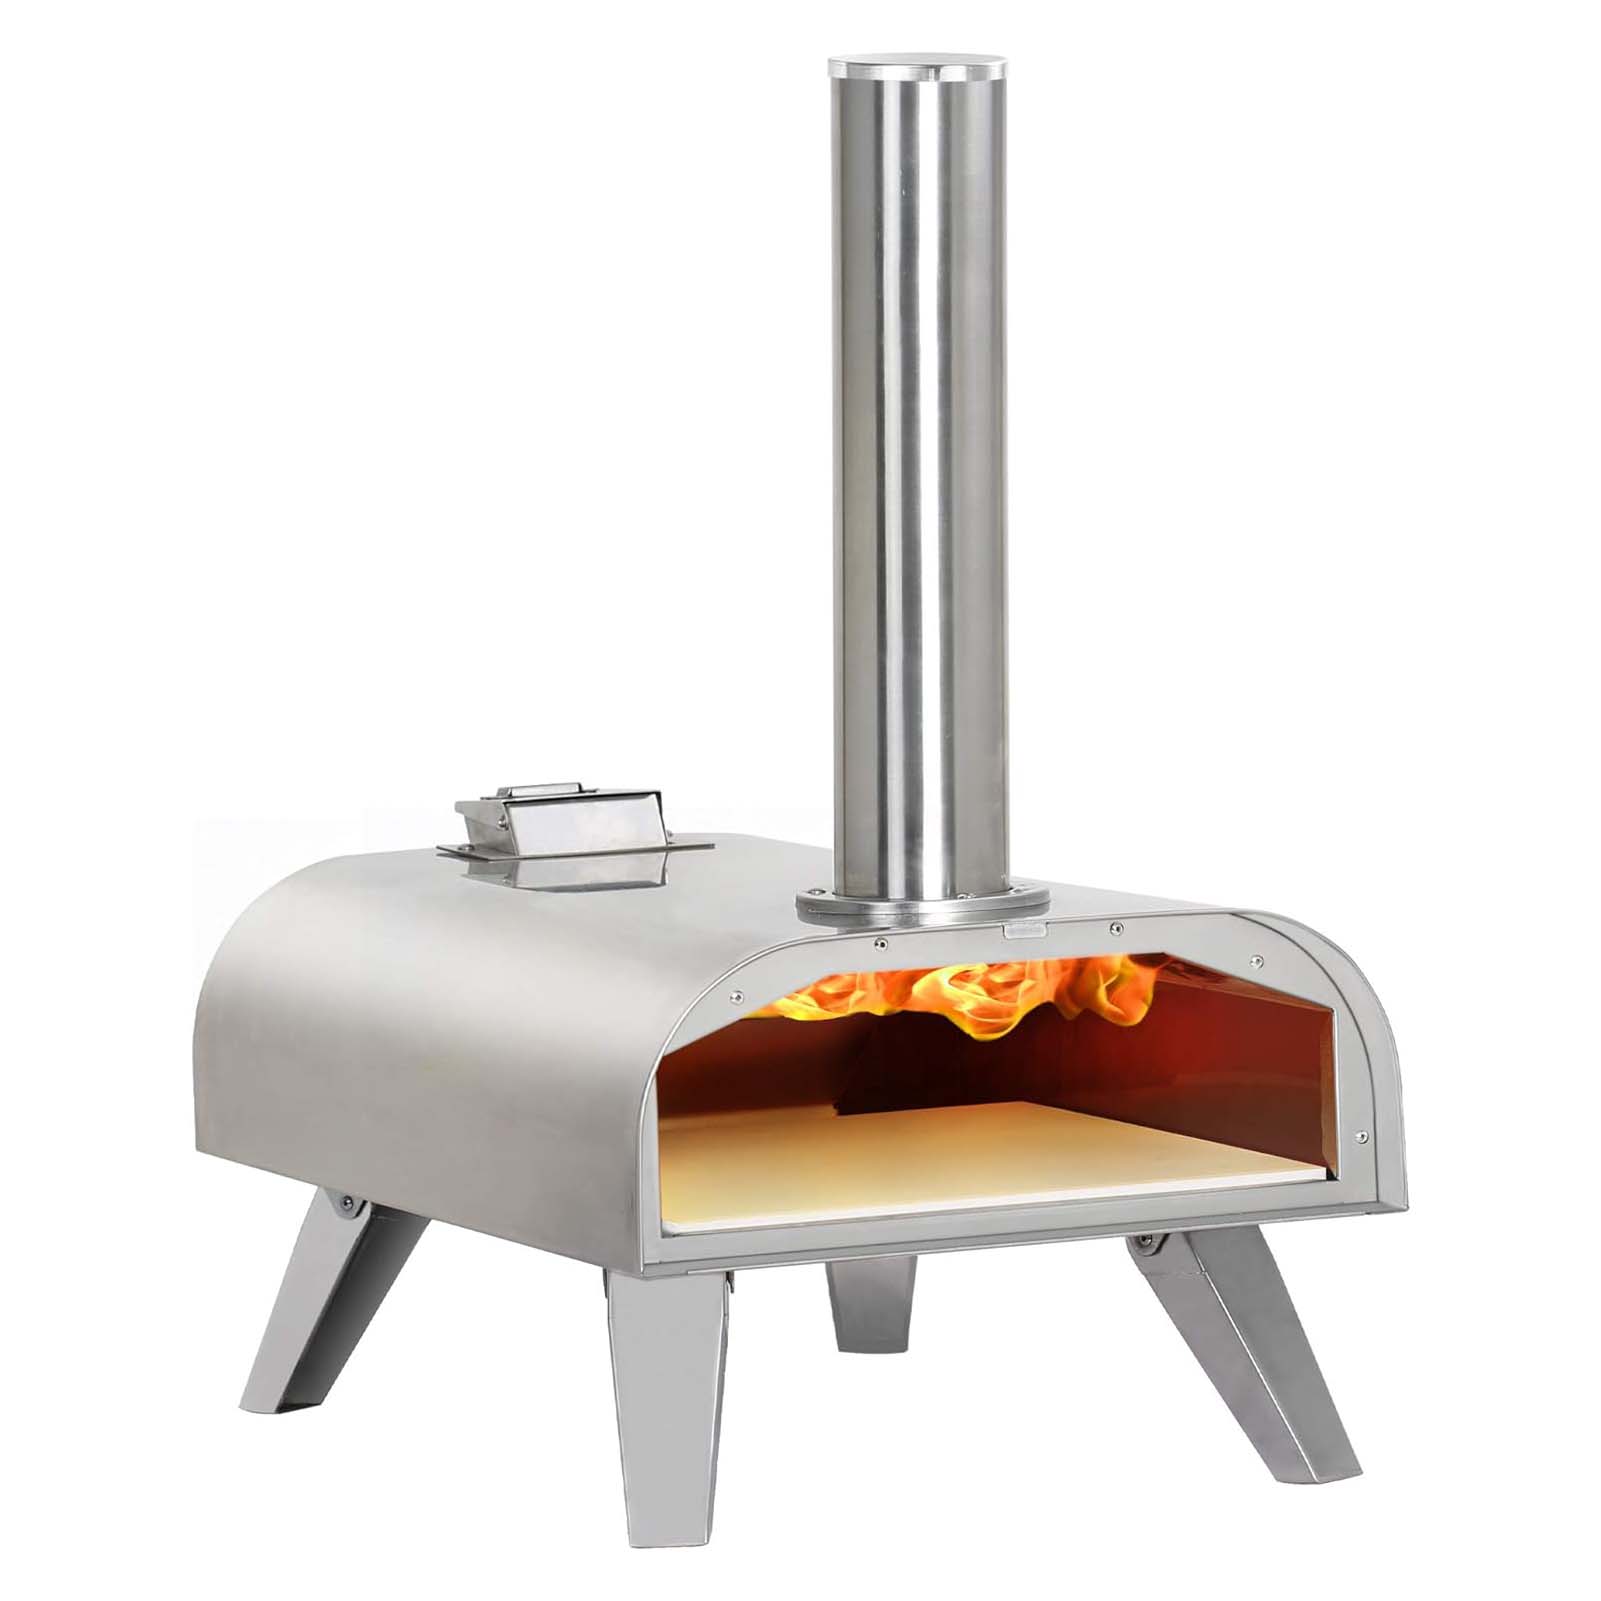 BIG HORN OUTDOORS Wood-Fired Pizza Oven with portable legs